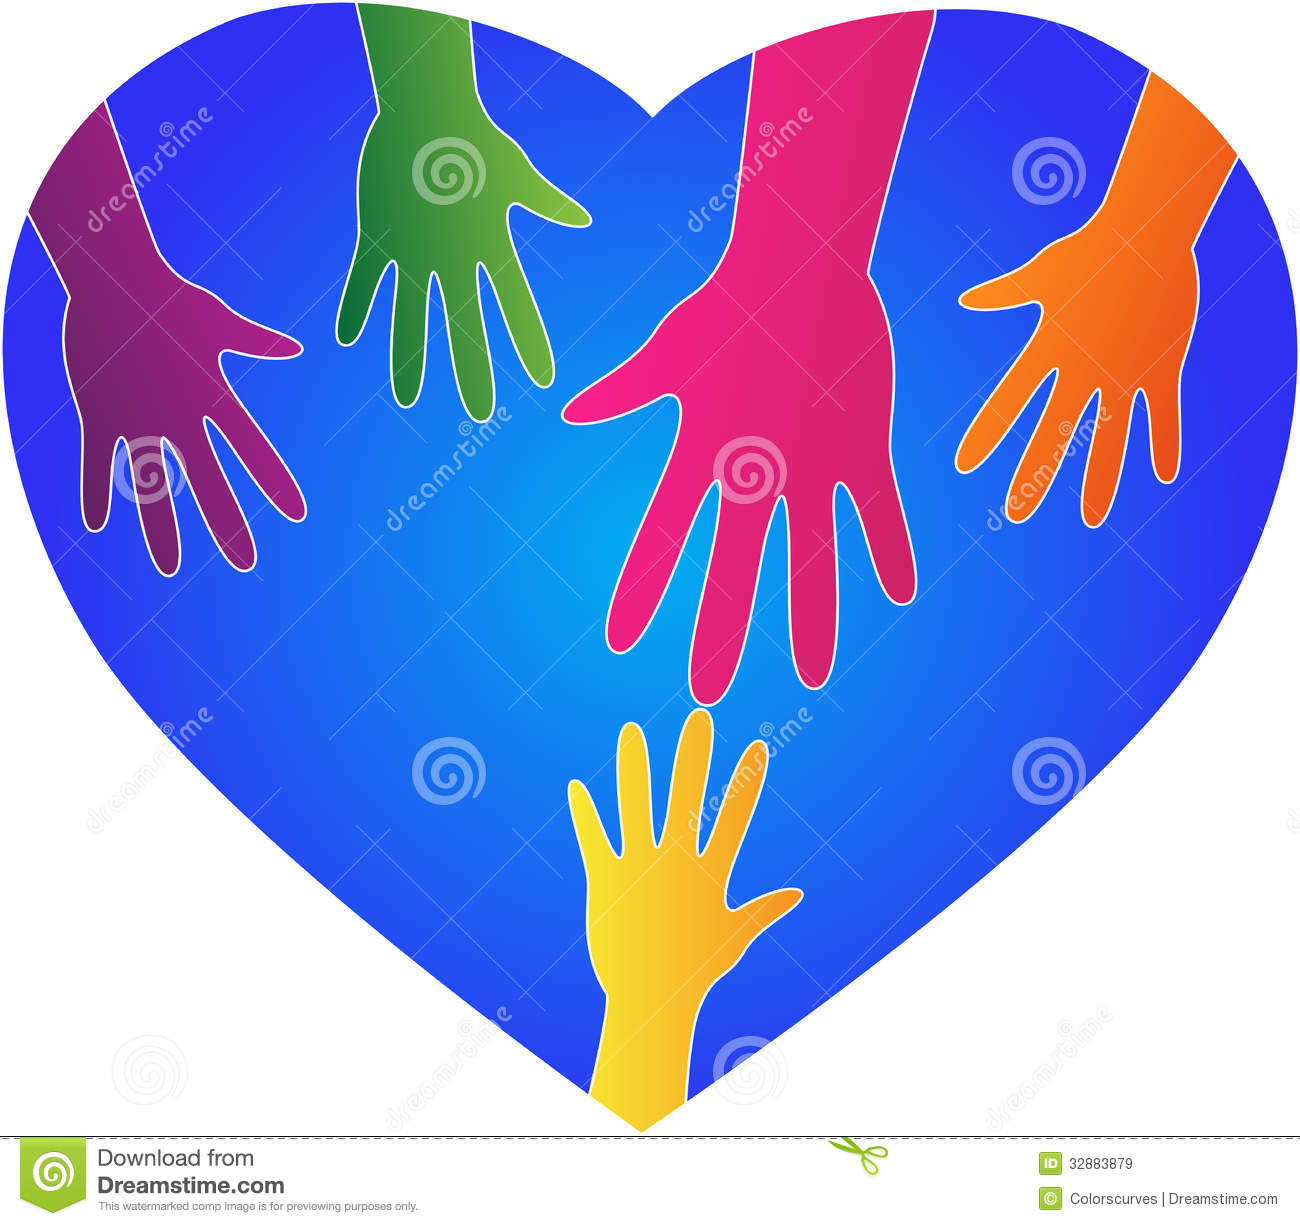 Helping Hands Royalty Free Stock Images   Image  32883879